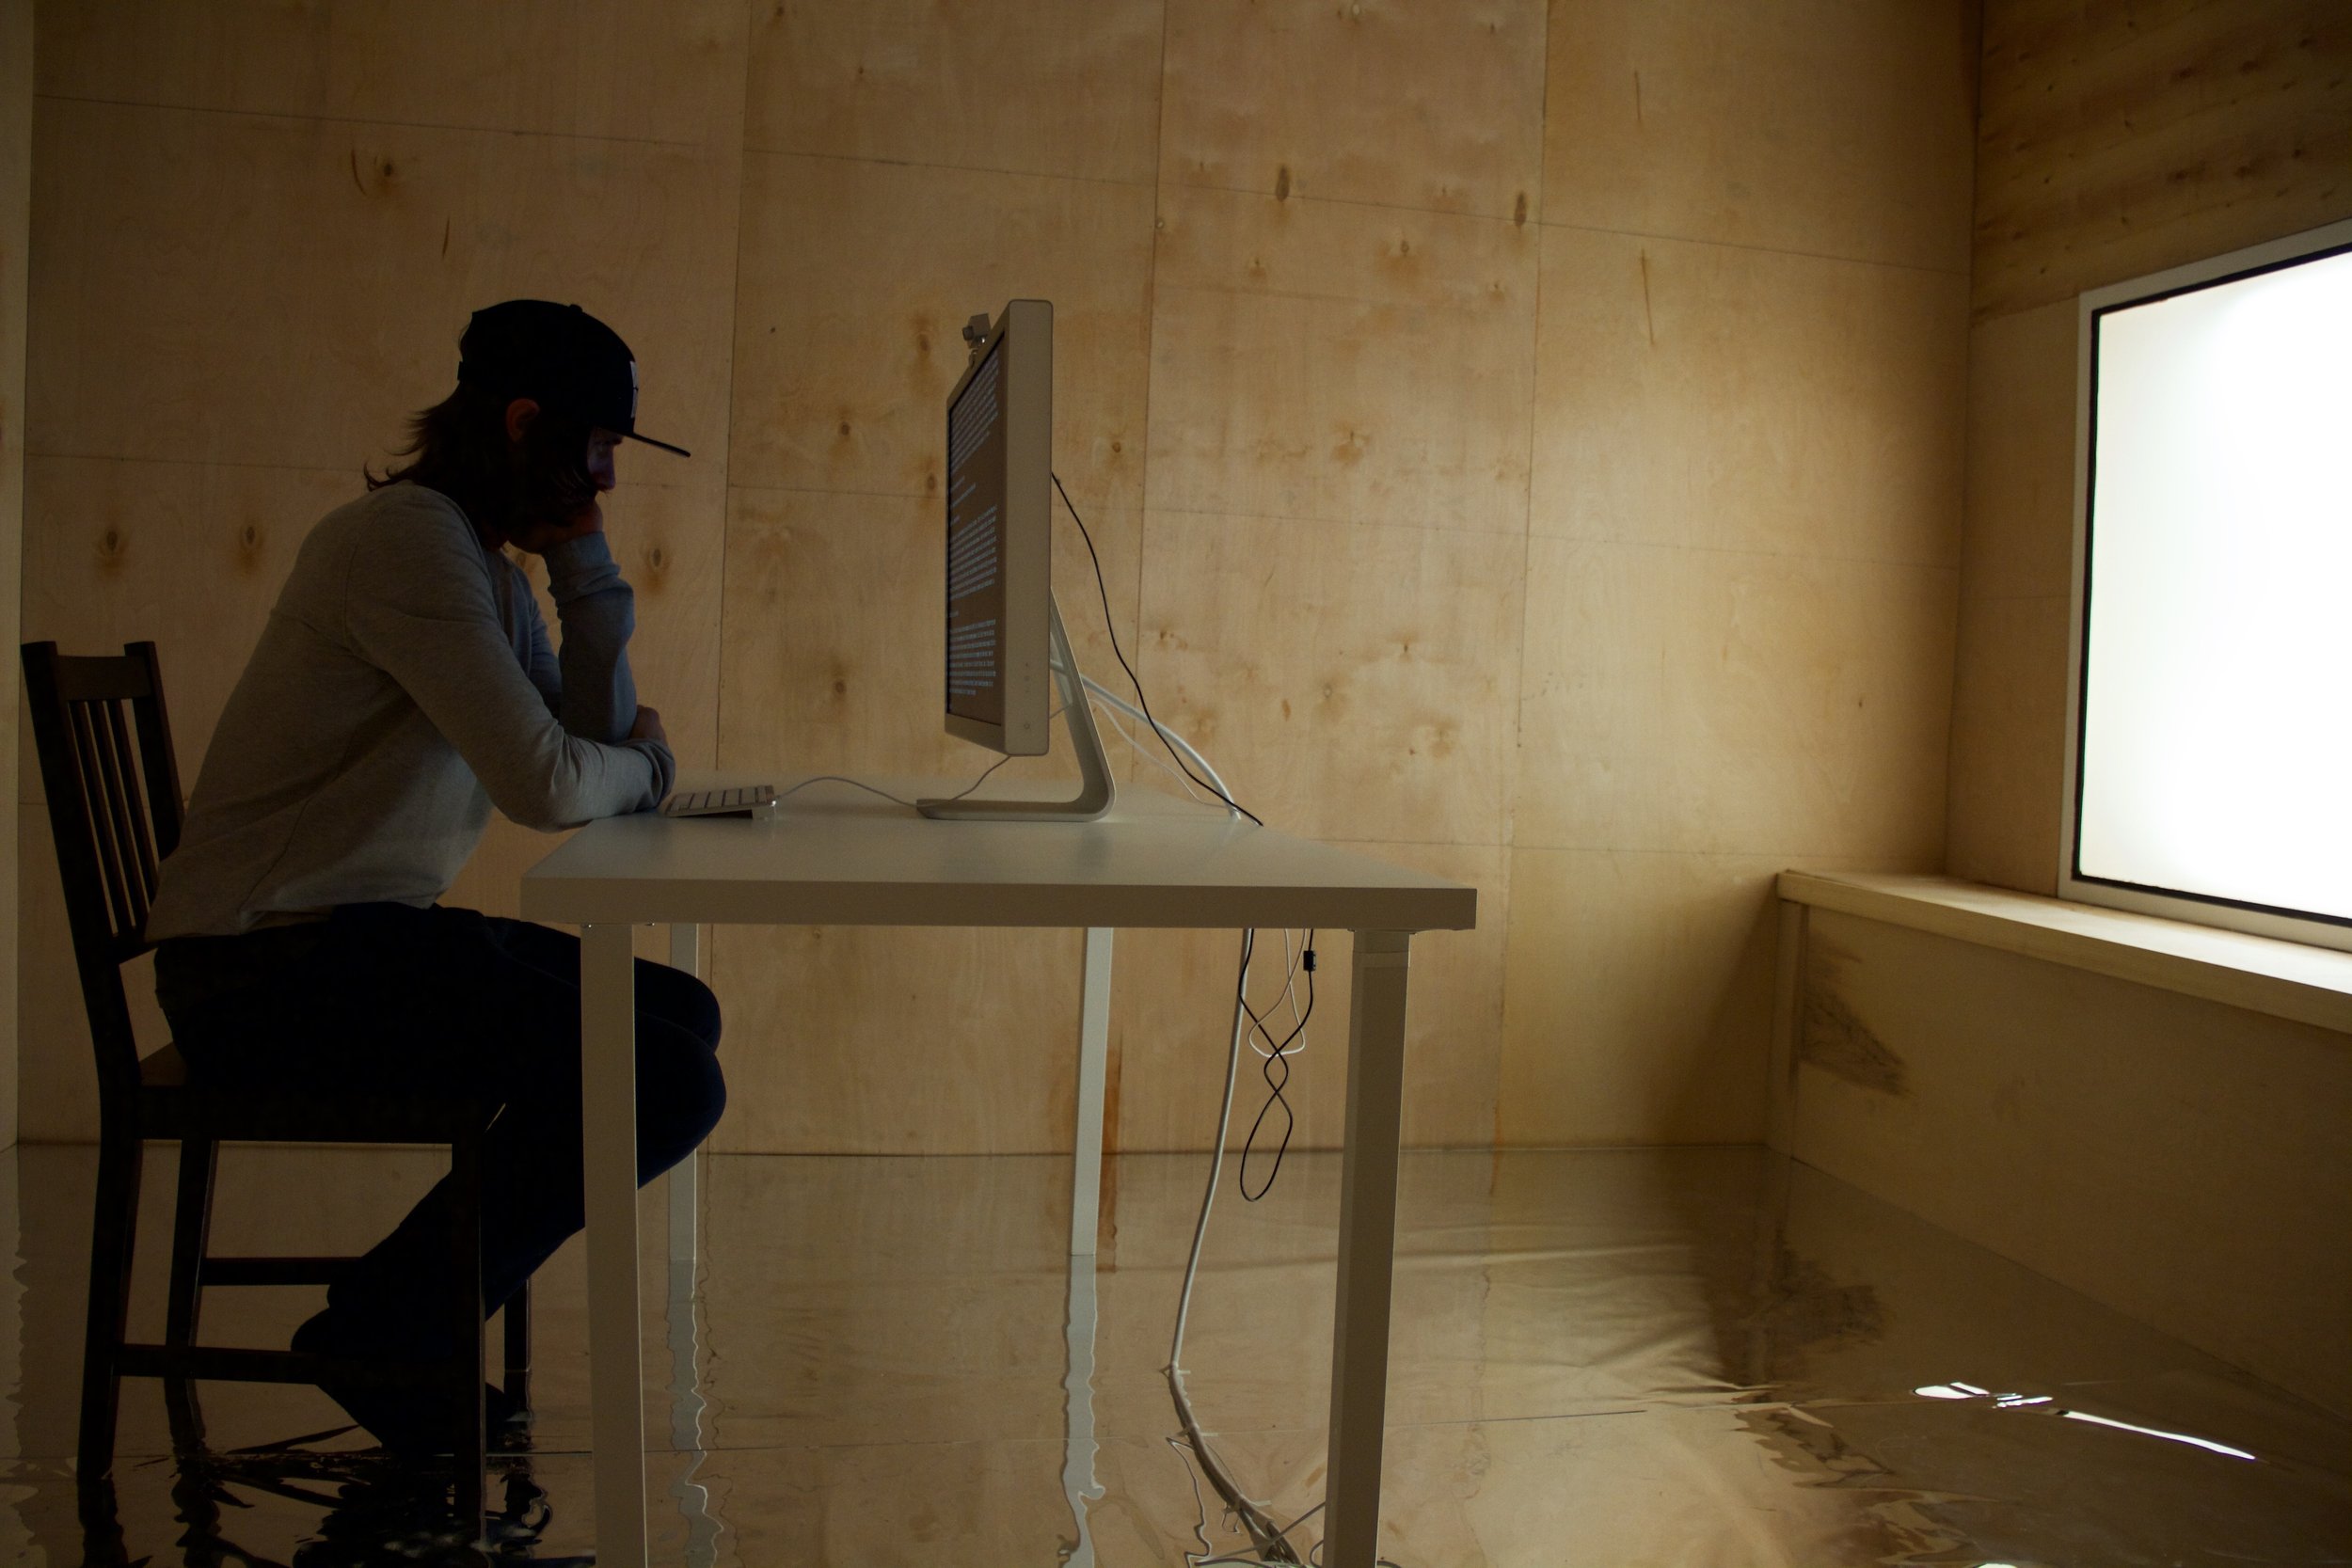 A person sits at a desk in front of a computer display reading text inside the installation of a room made of wood panels. Photo by Simon Courchel.